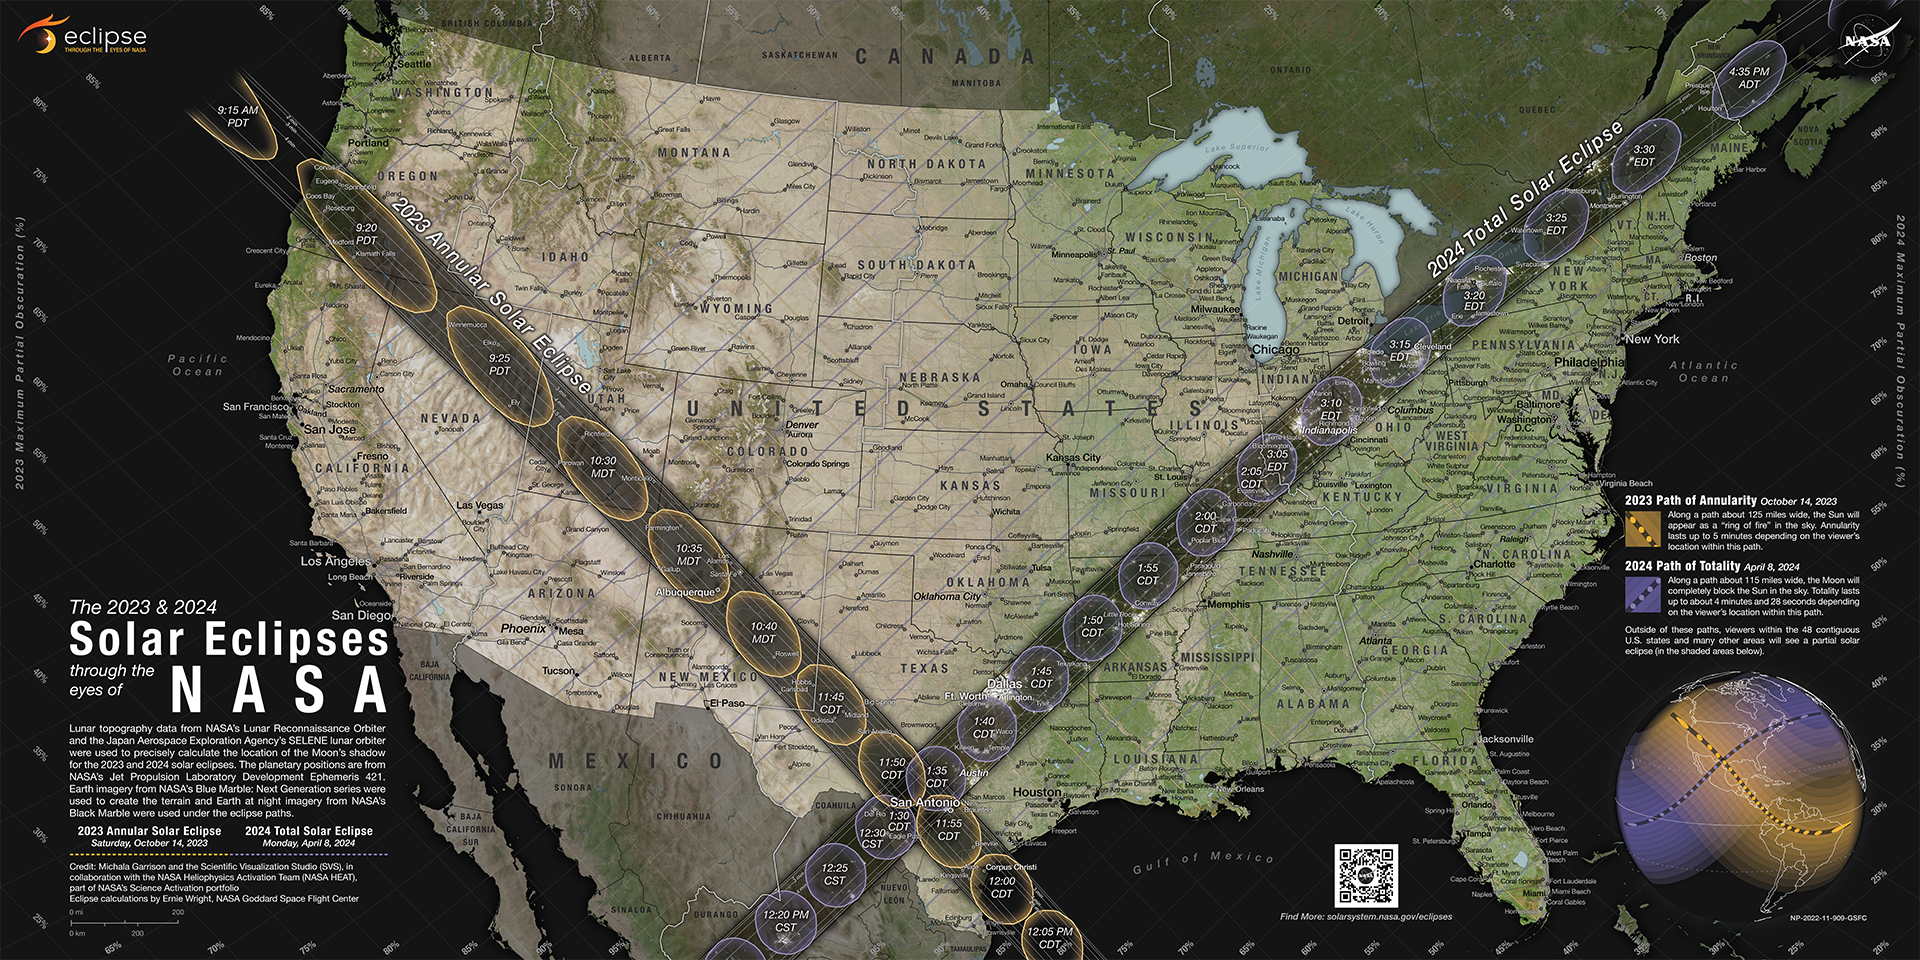 NASA path of eclipse totality